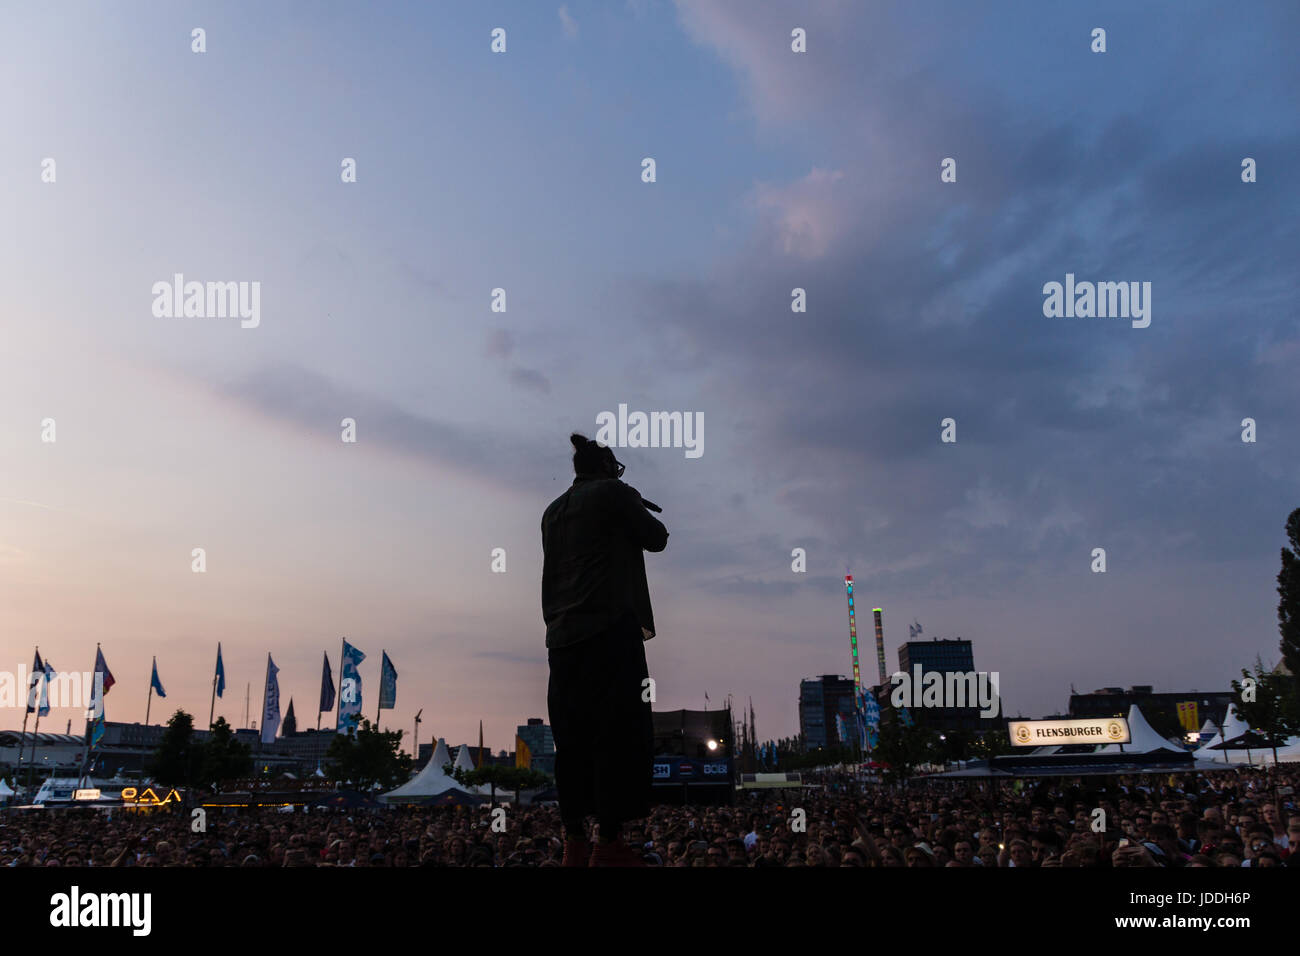 Kiel, Germany. 19th June, 2017.The Rapper Samy Deluxe is performing on the Hörn stage during the Kieler Woche 2017 Credit: Björn Deutschmann/Alamy Live News Stock Photo